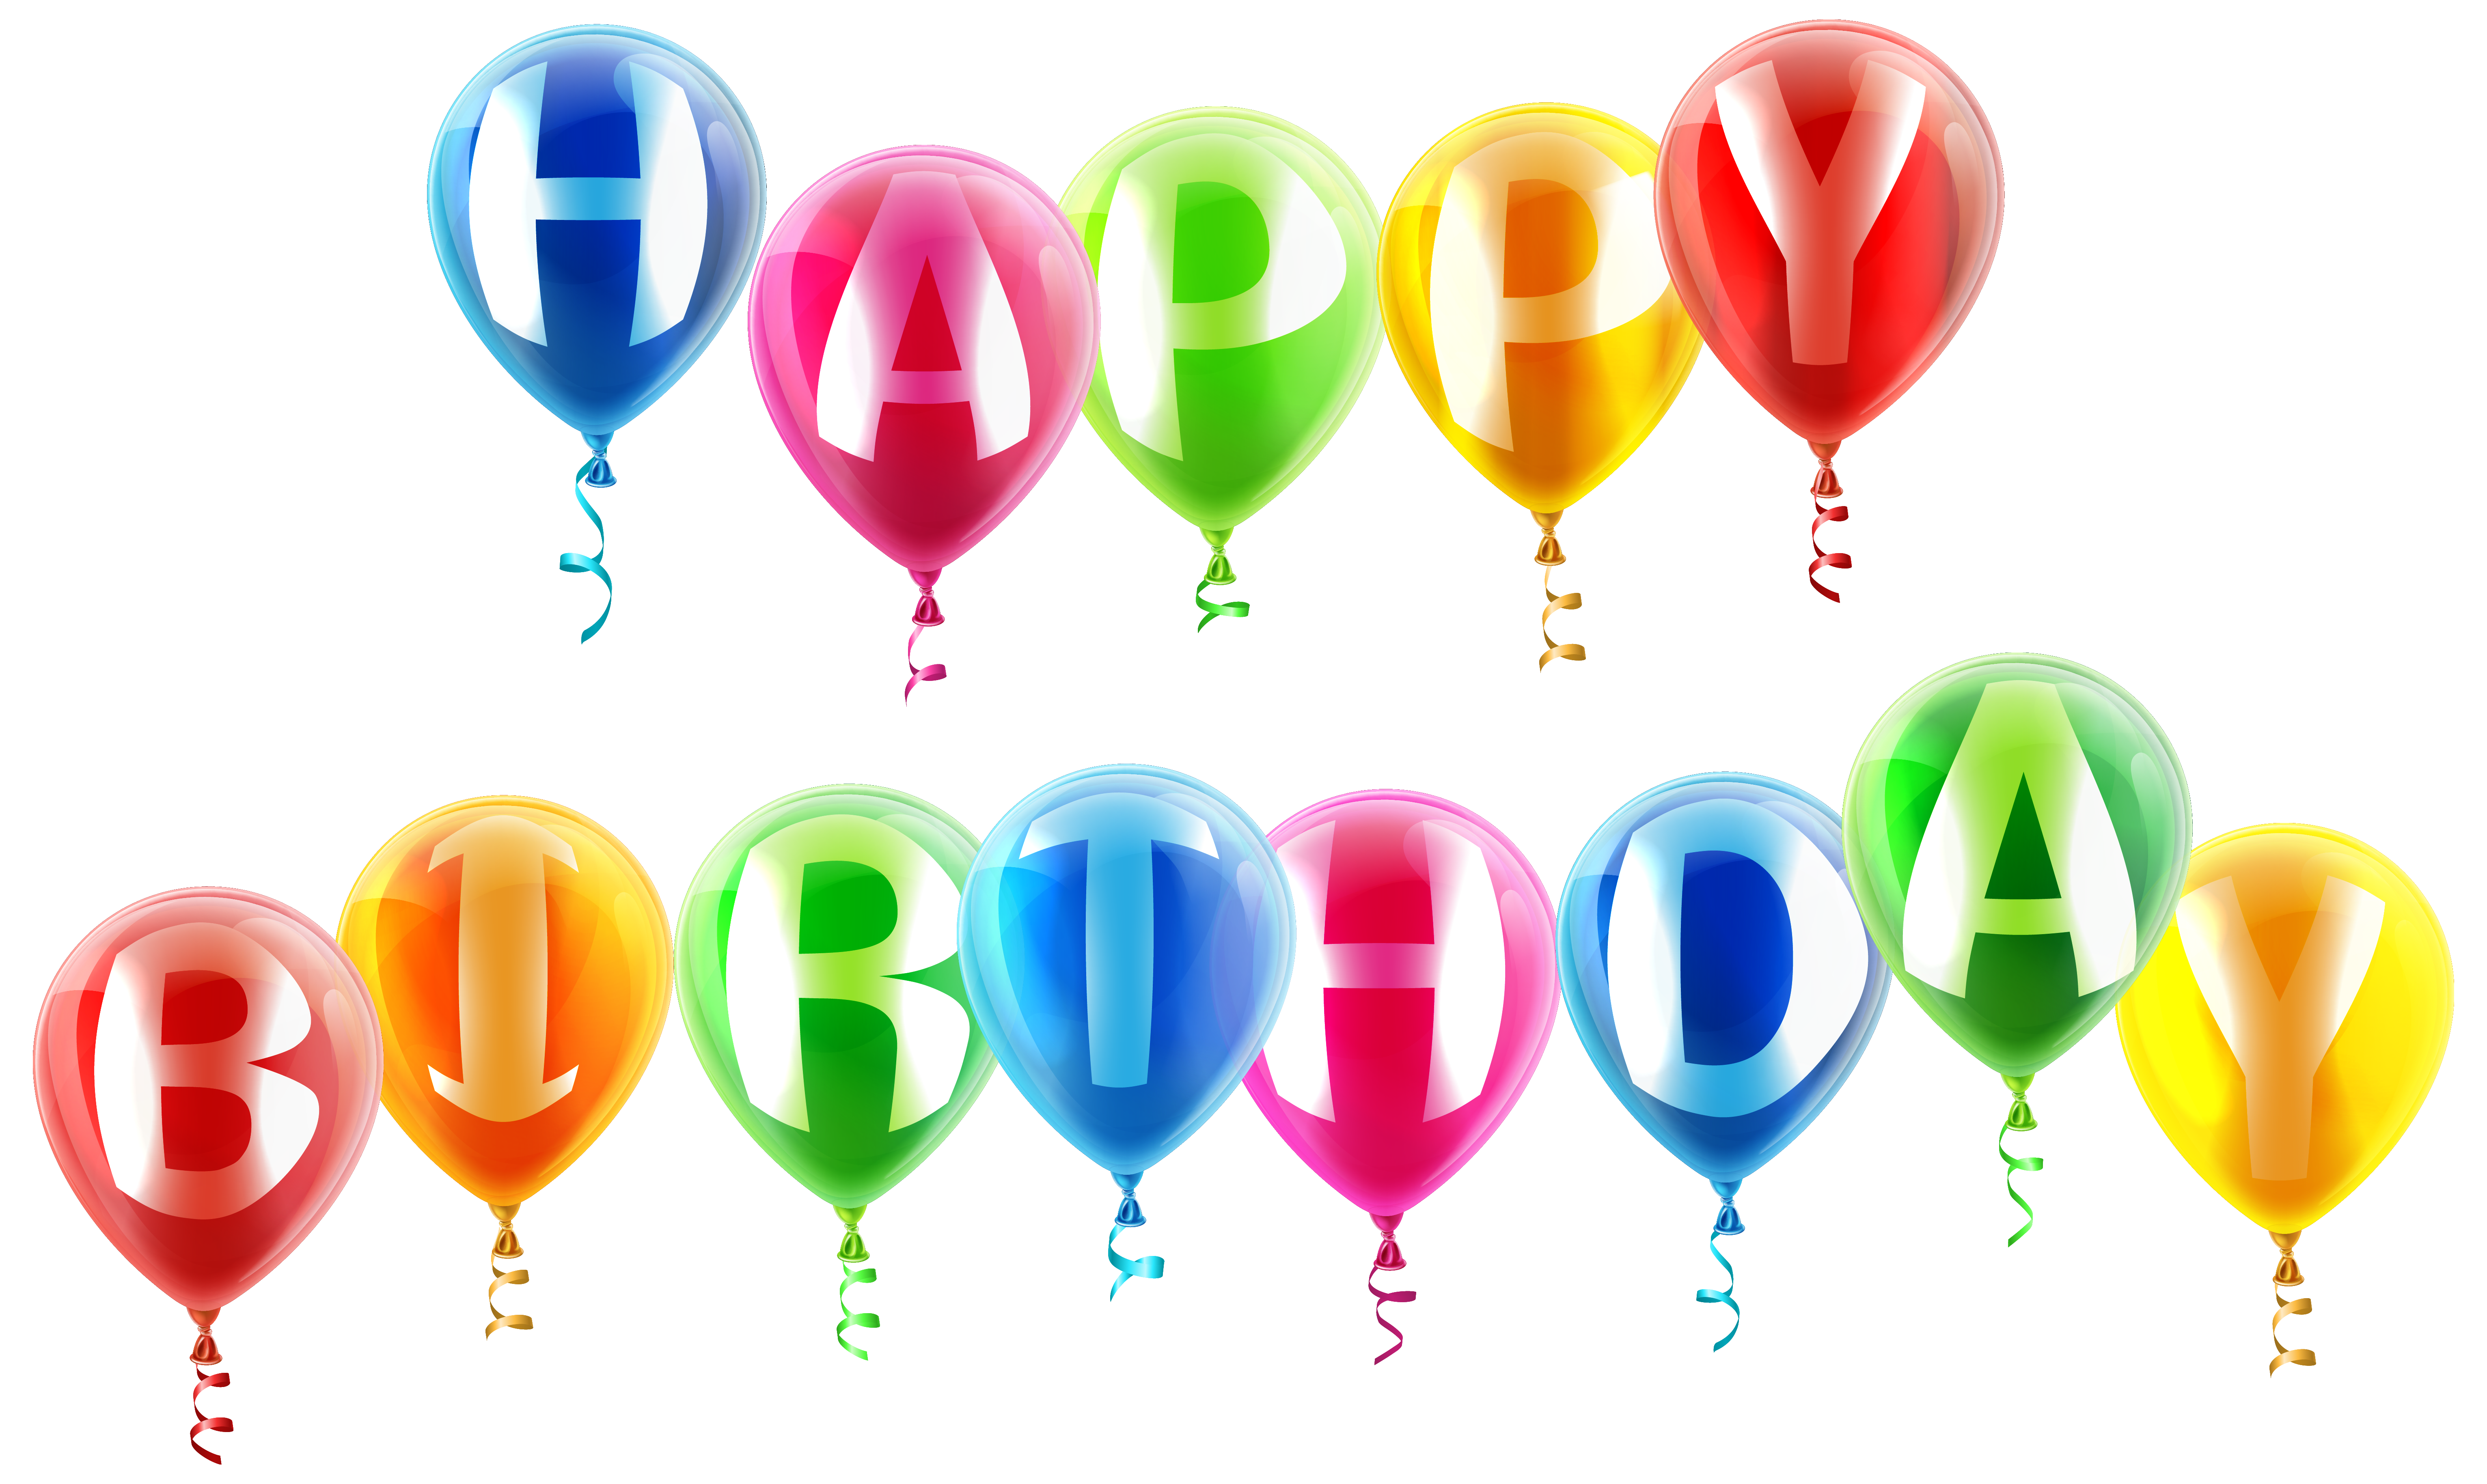 Happy Birthday PNG images free download.